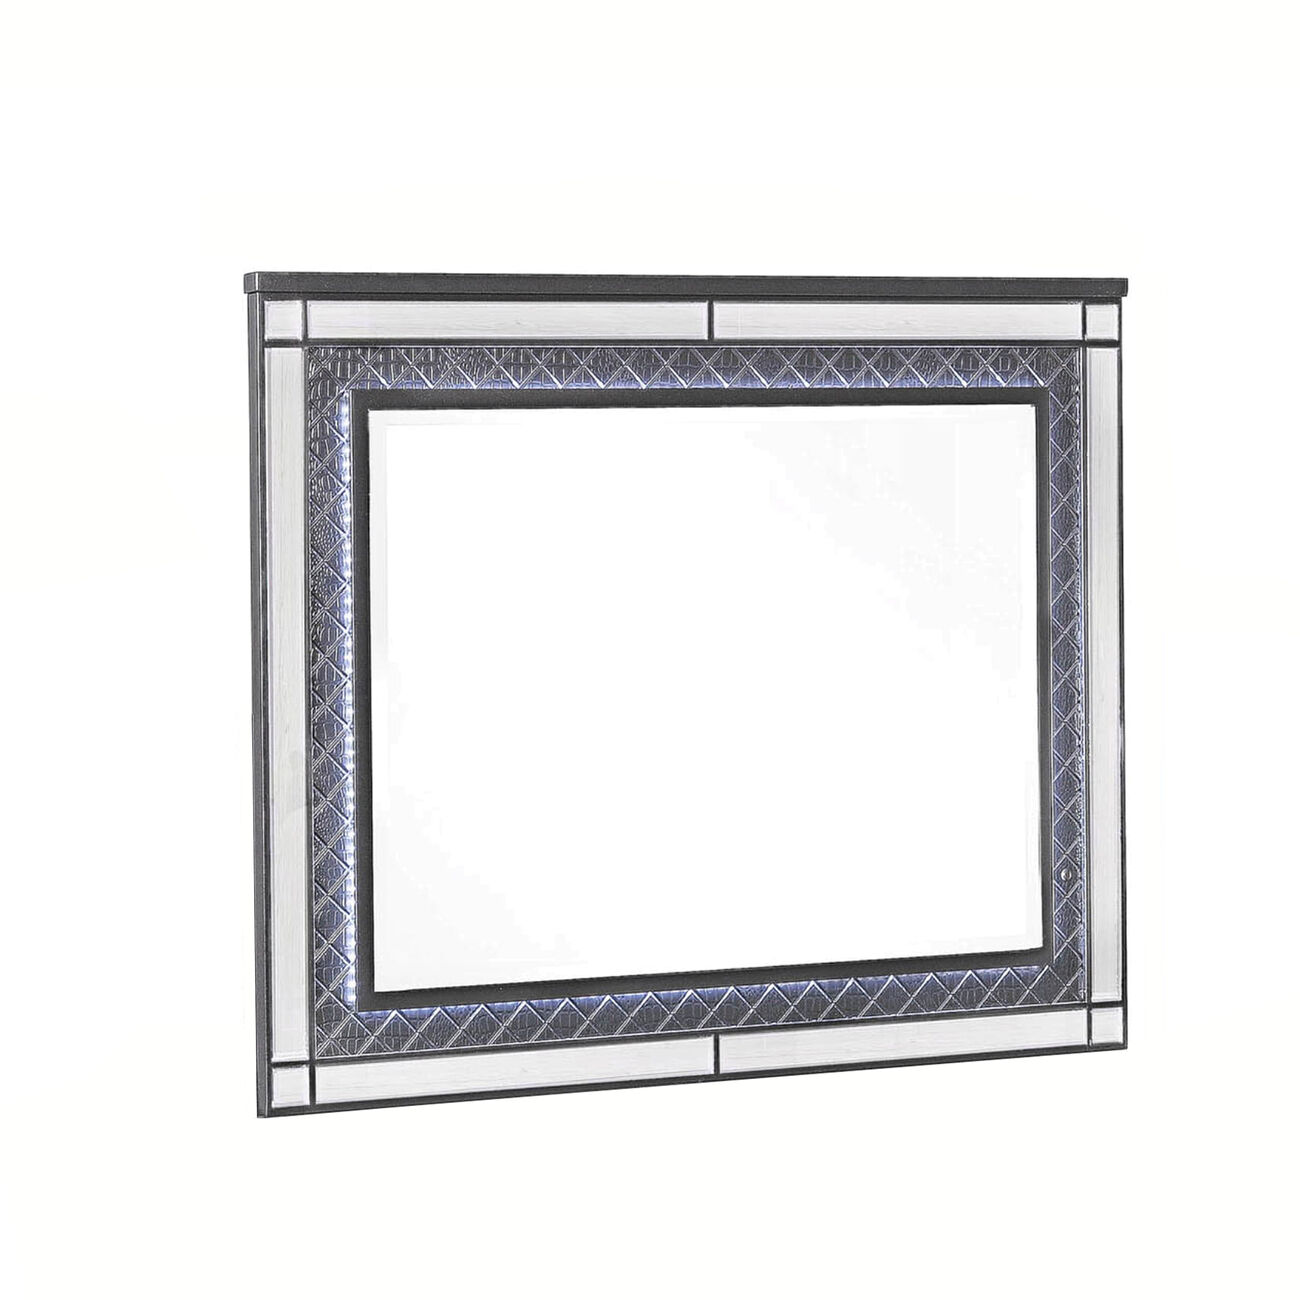 LED Trim Wooden Frame Mirror with Diamond Pattern, Gray and Silver